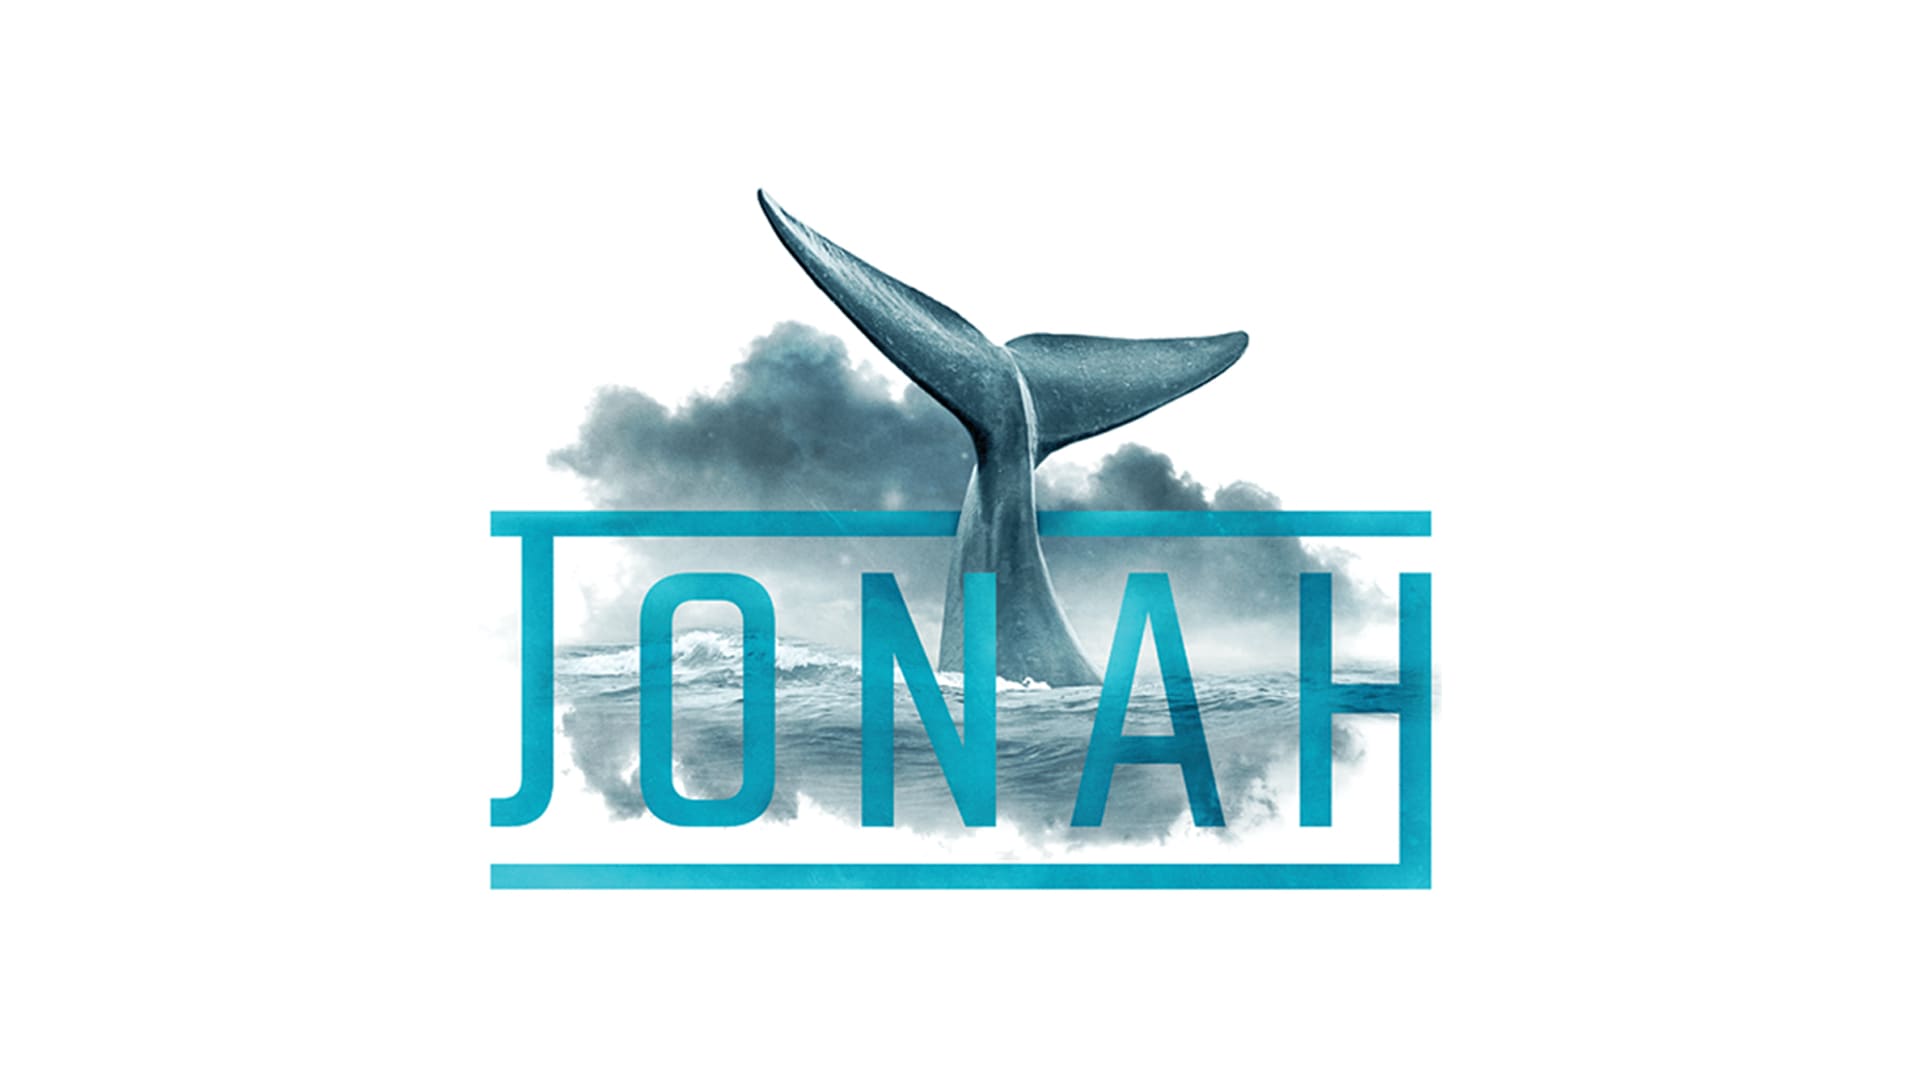 There’s a Little Jonah in All of Us